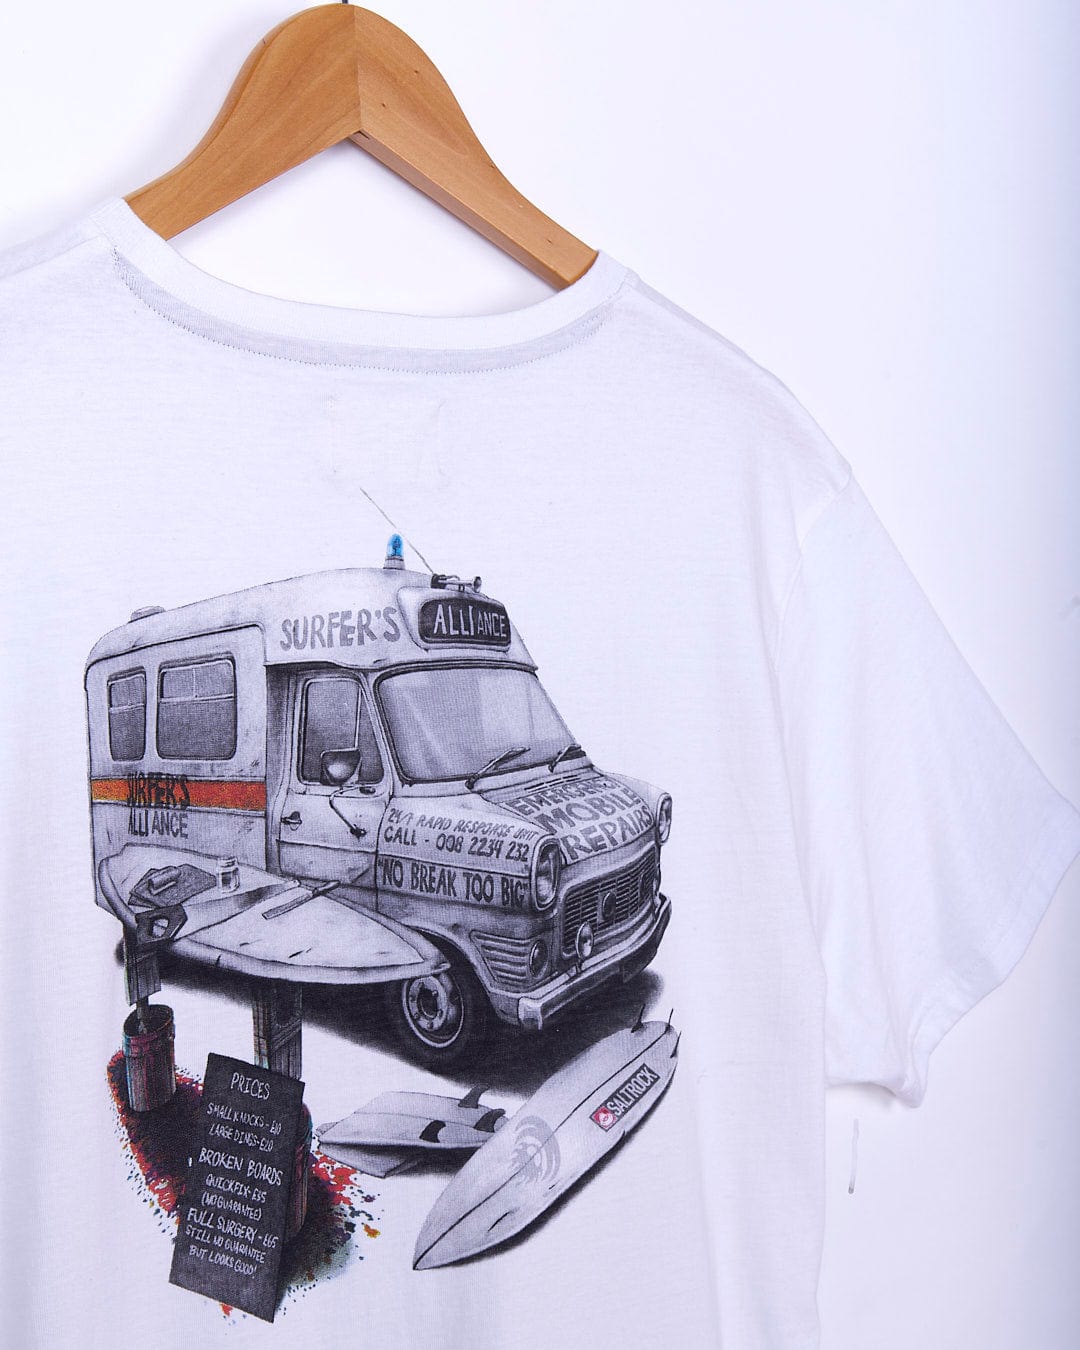 A Saltrock white t-shirt with a drawing of an Ambulance and surfboards.